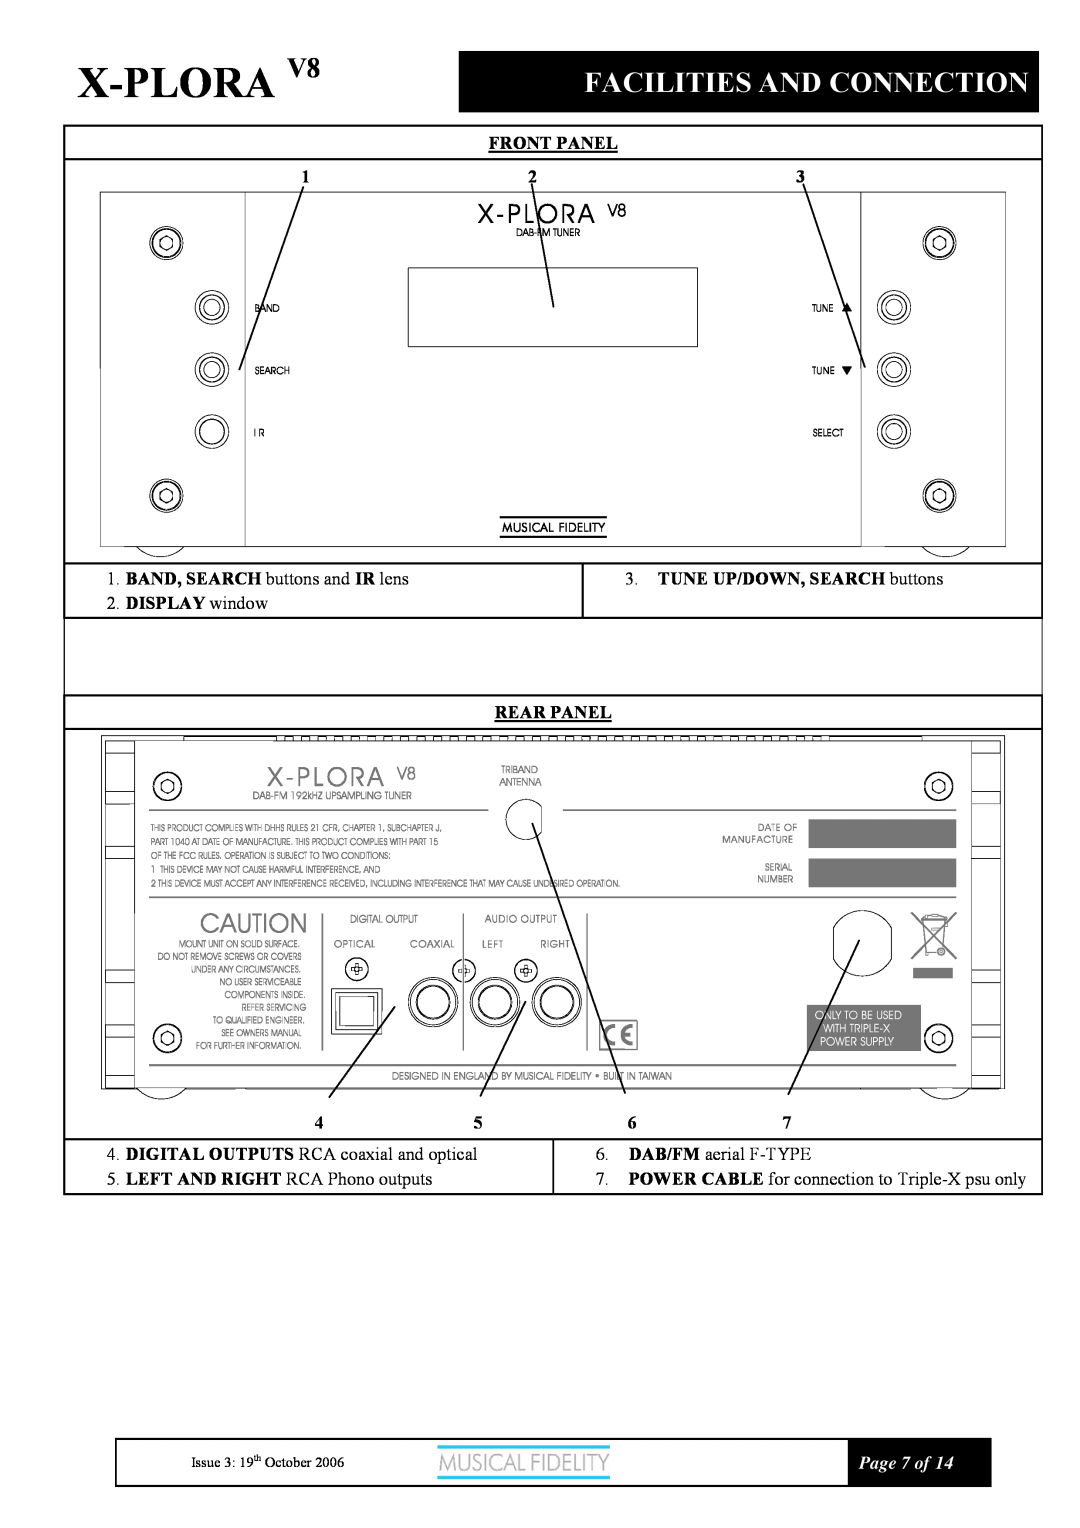 Musical Fidelity X-V8 manual Facilities And Connection, X-Plora, Page 7 of 